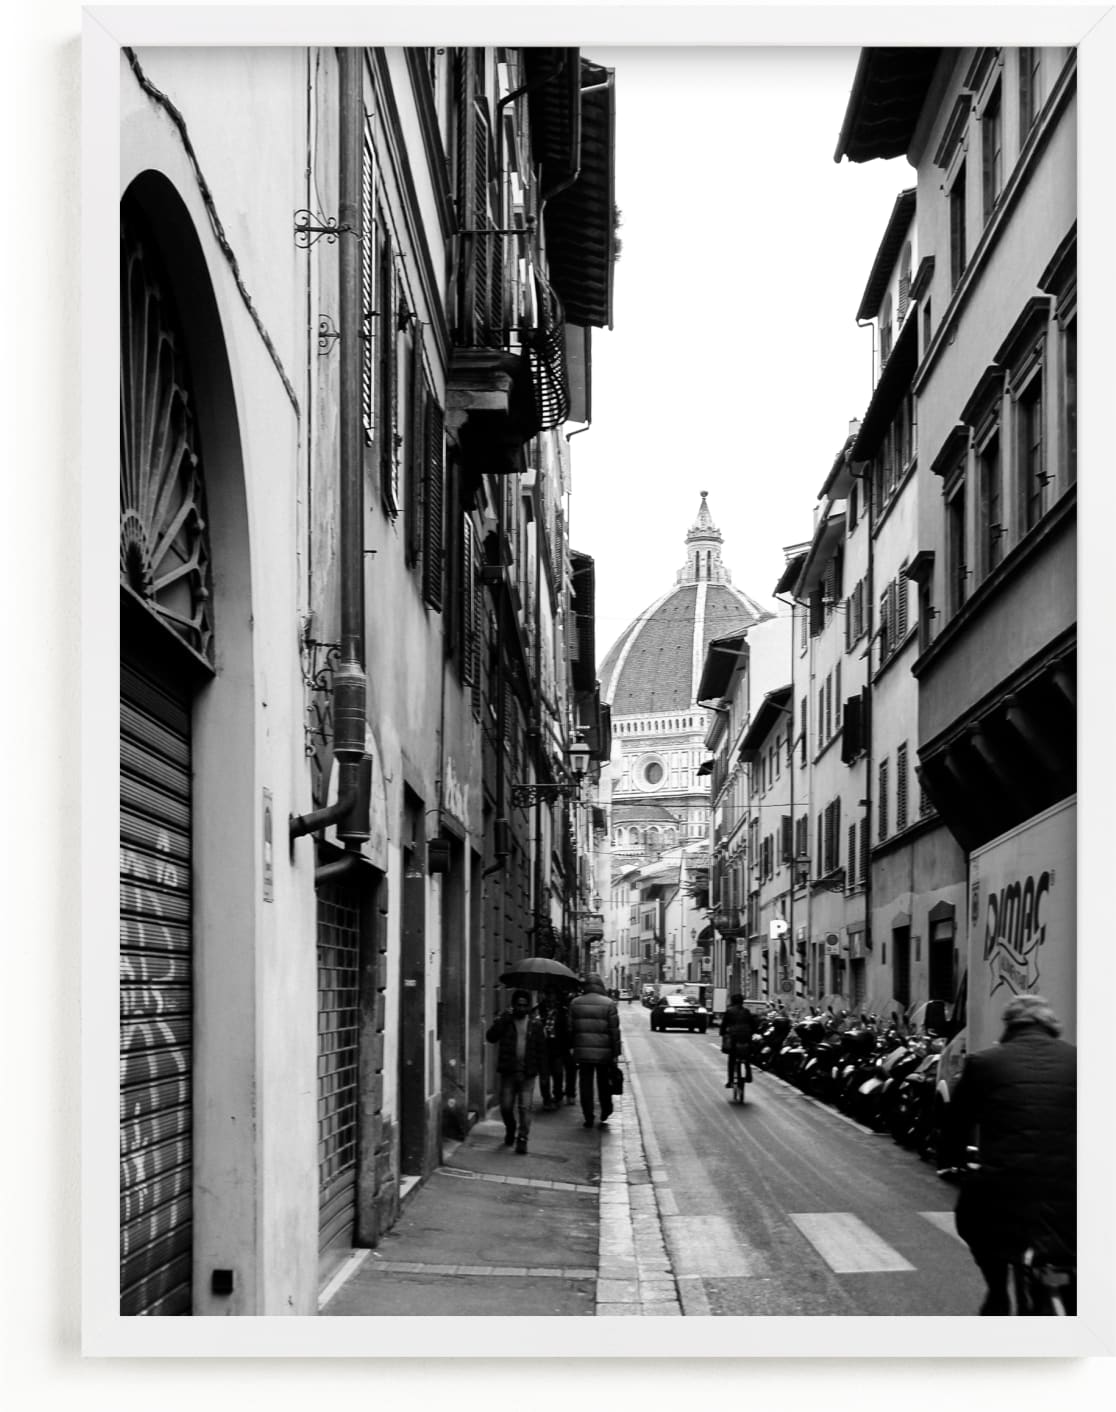 This is a black and white art by Joey Crisostomo-Wynne called Peeking Through No. 4 Il Duomo di Firenze.